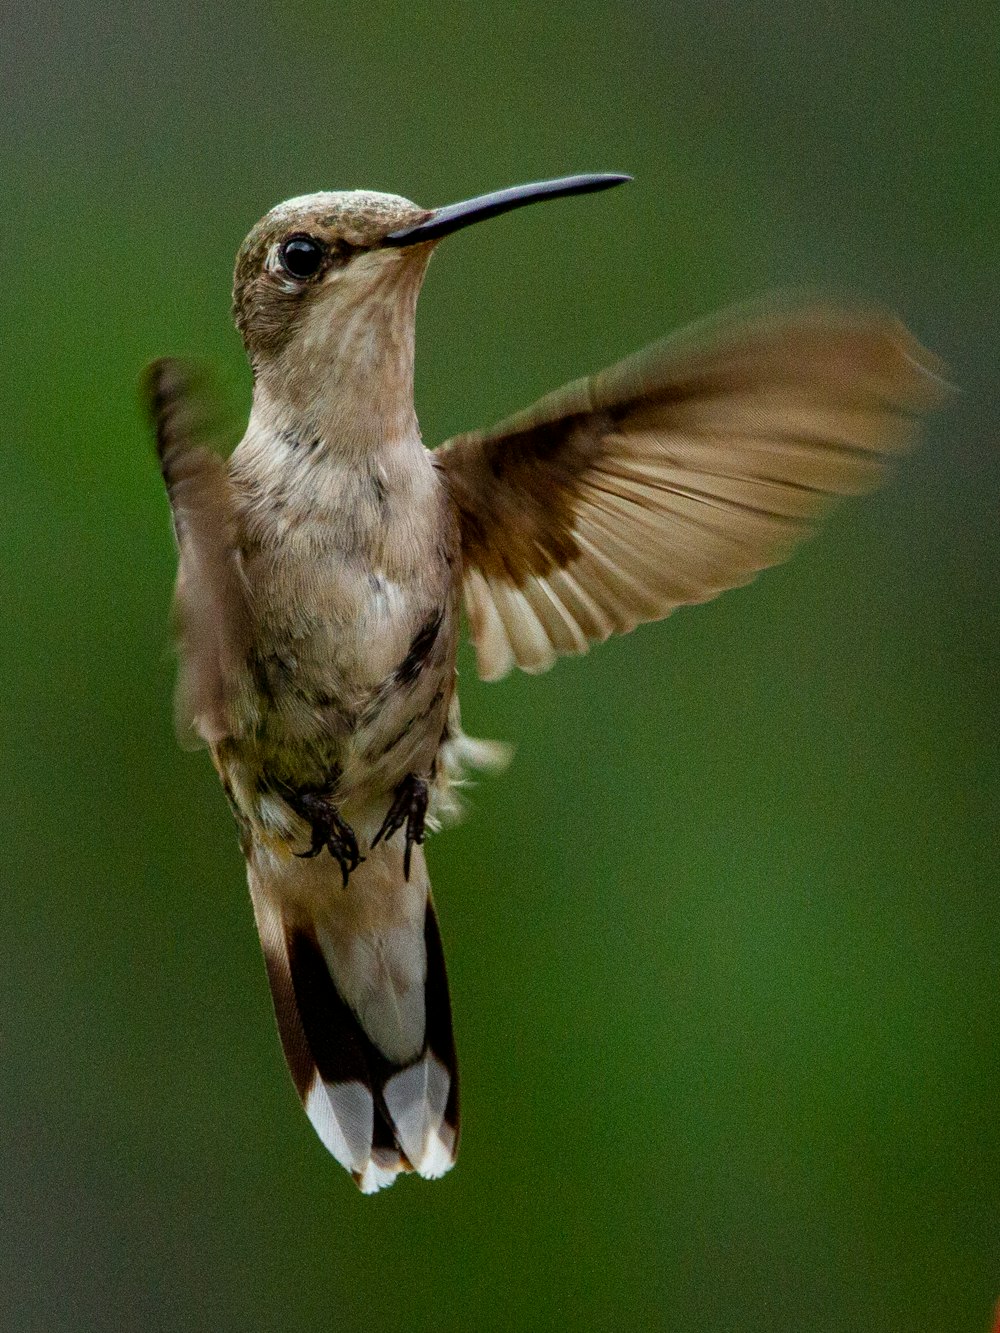 a hummingbird flapping its wings in the air